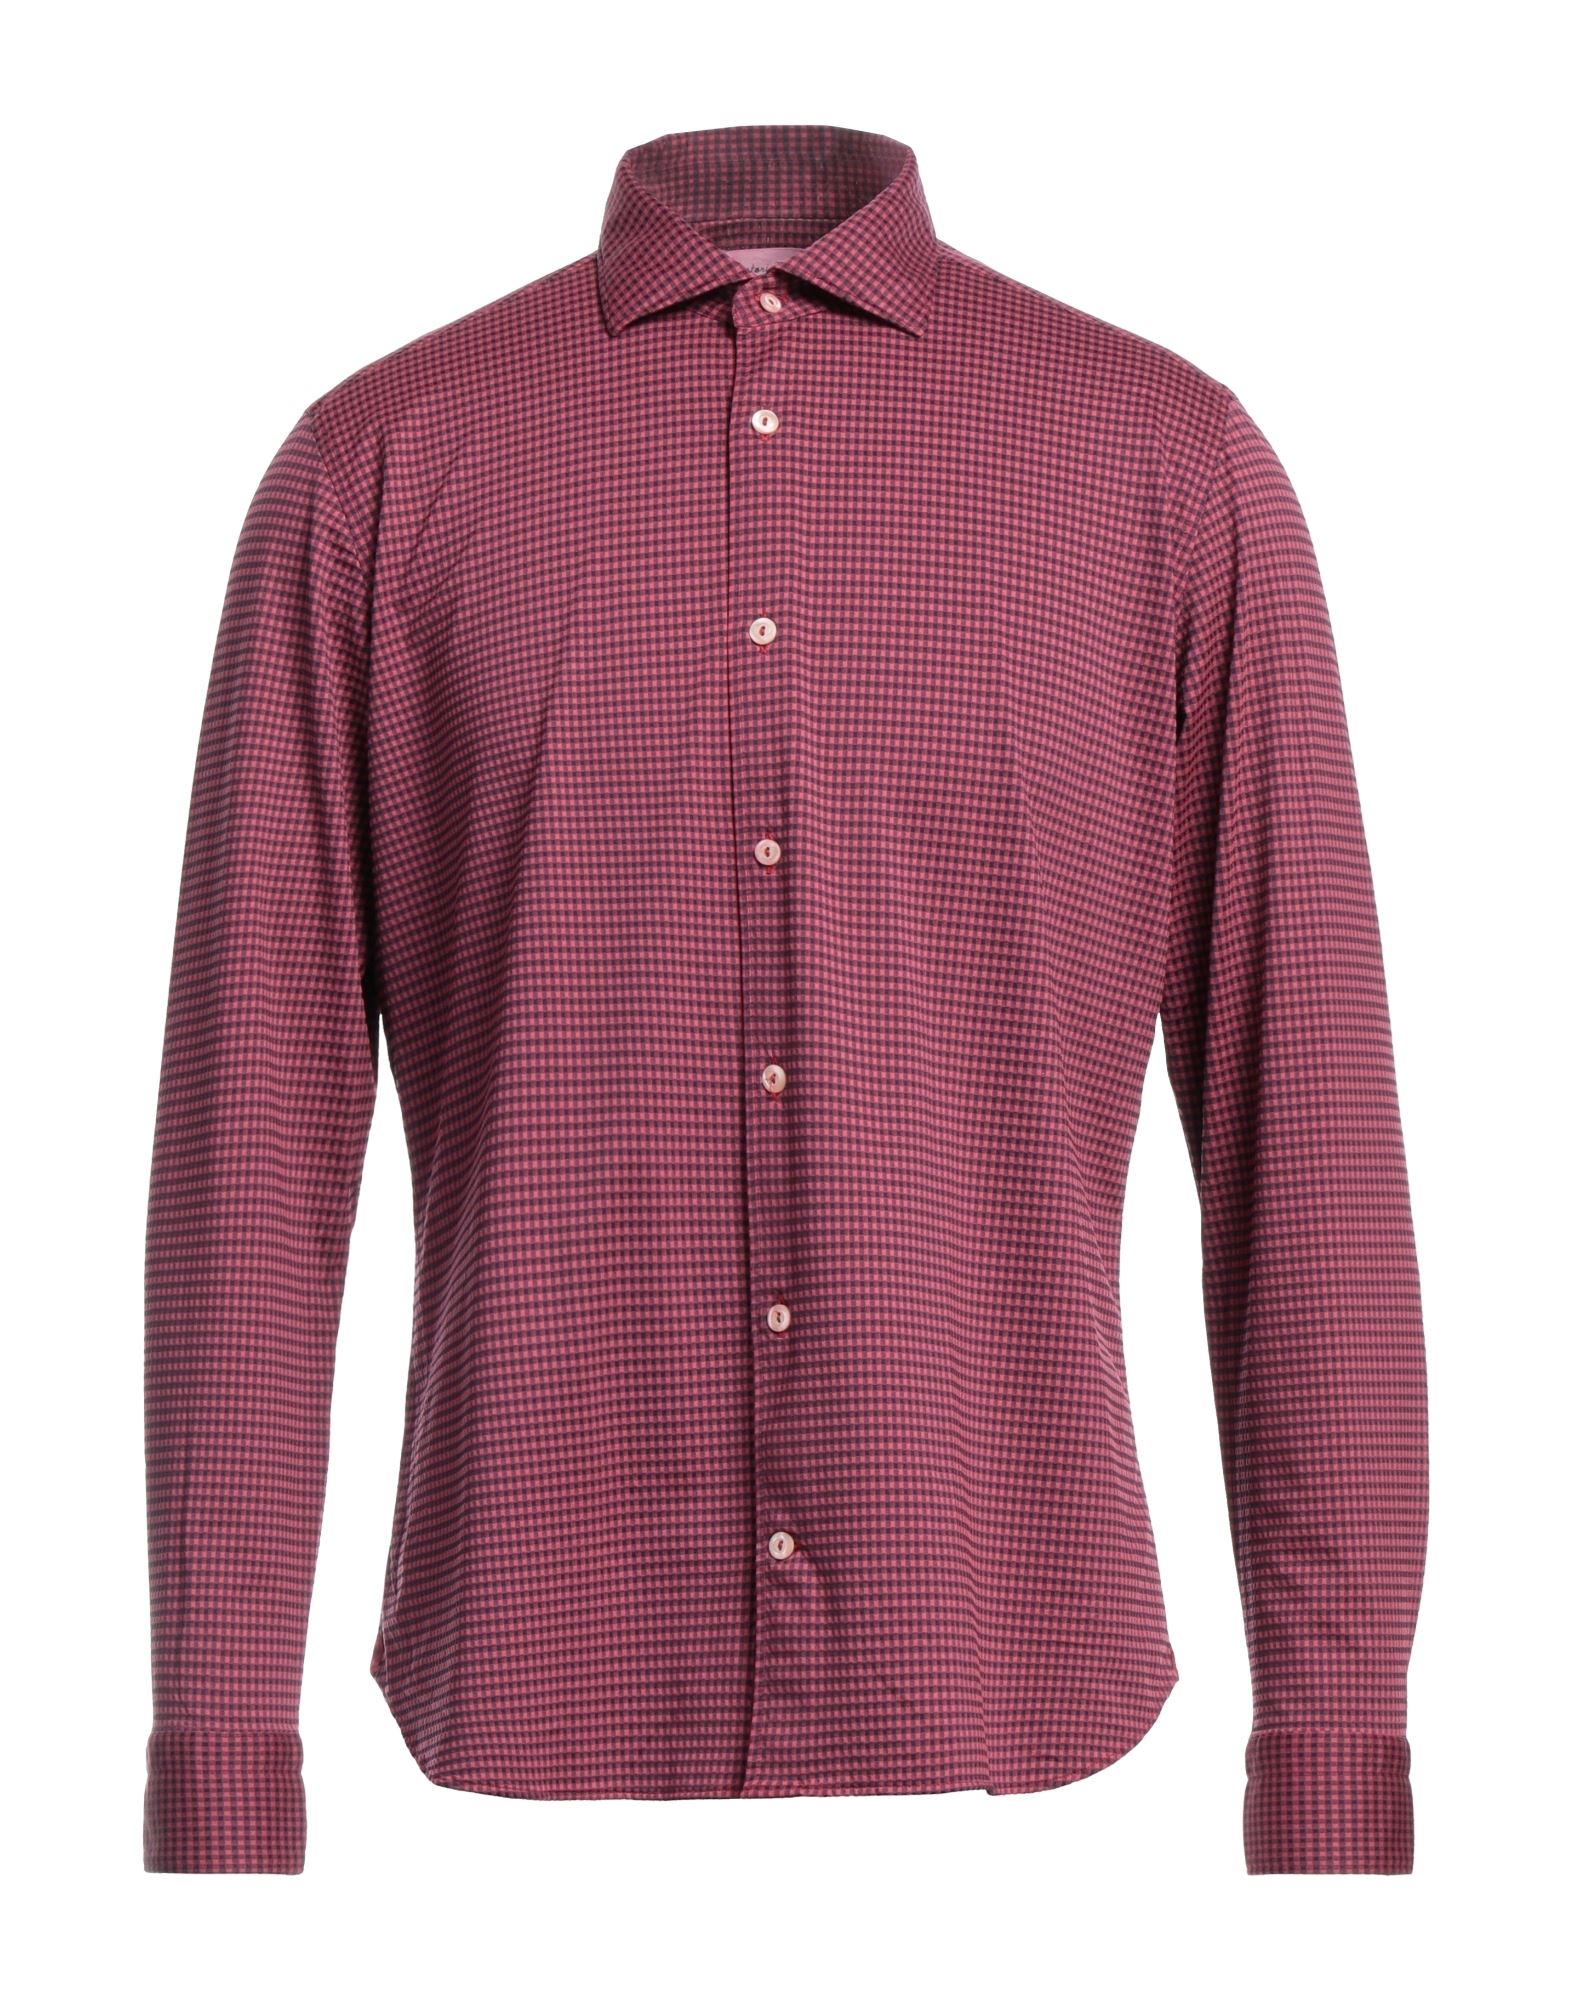 Tintoria Mattei 954 Shirts In Red